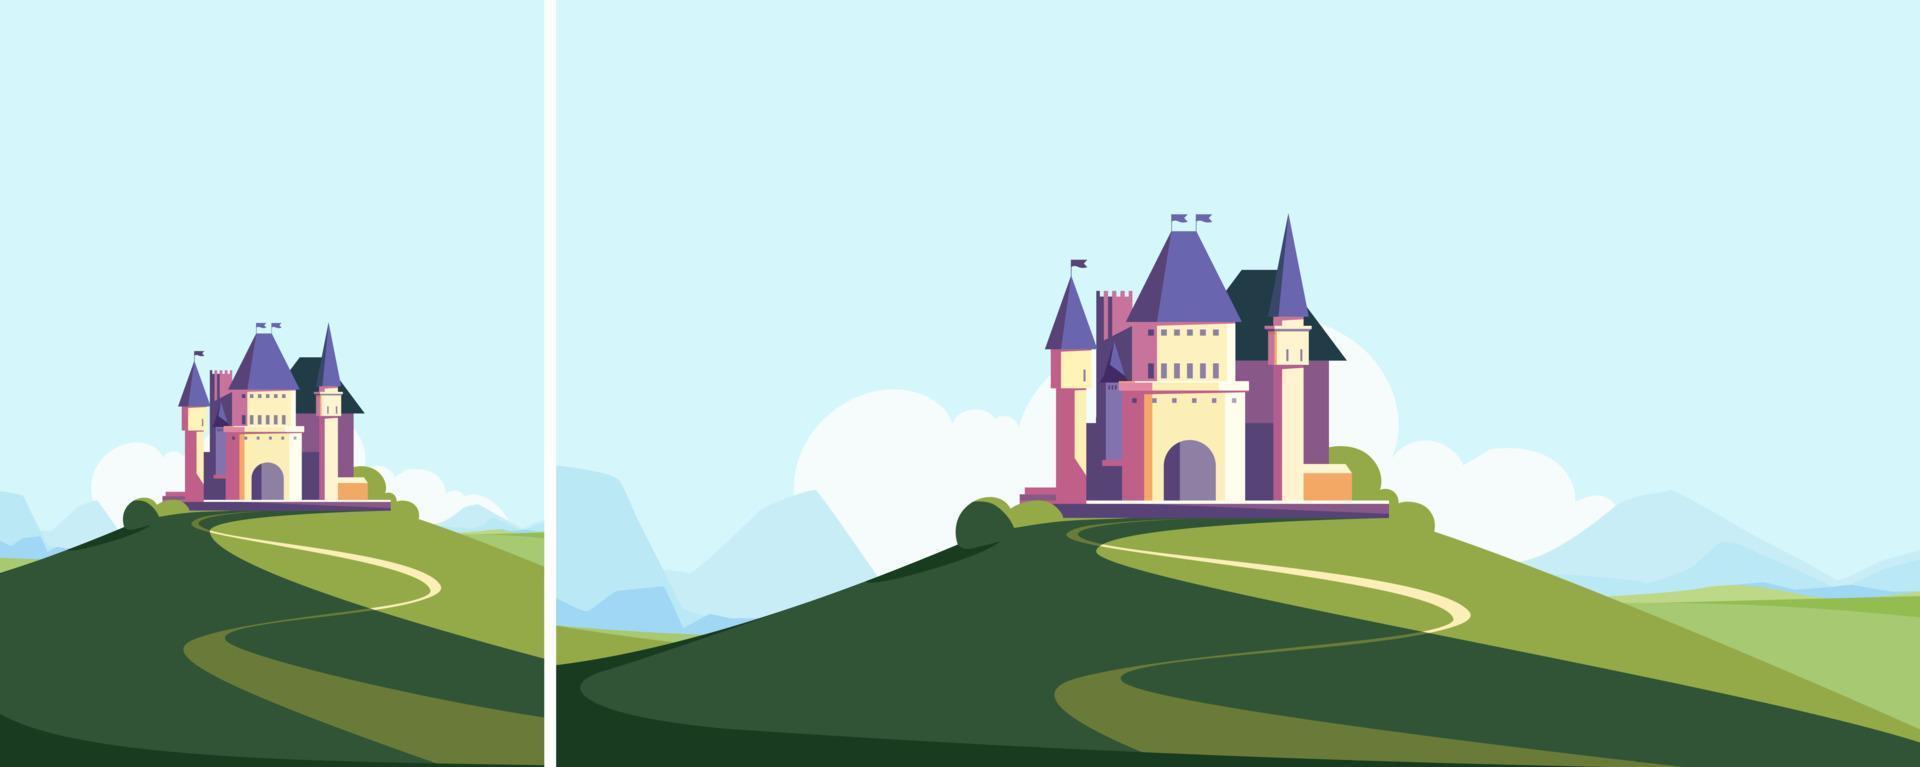 Castle on the hill in summer season. Landscape with medieval building in different formats. vector